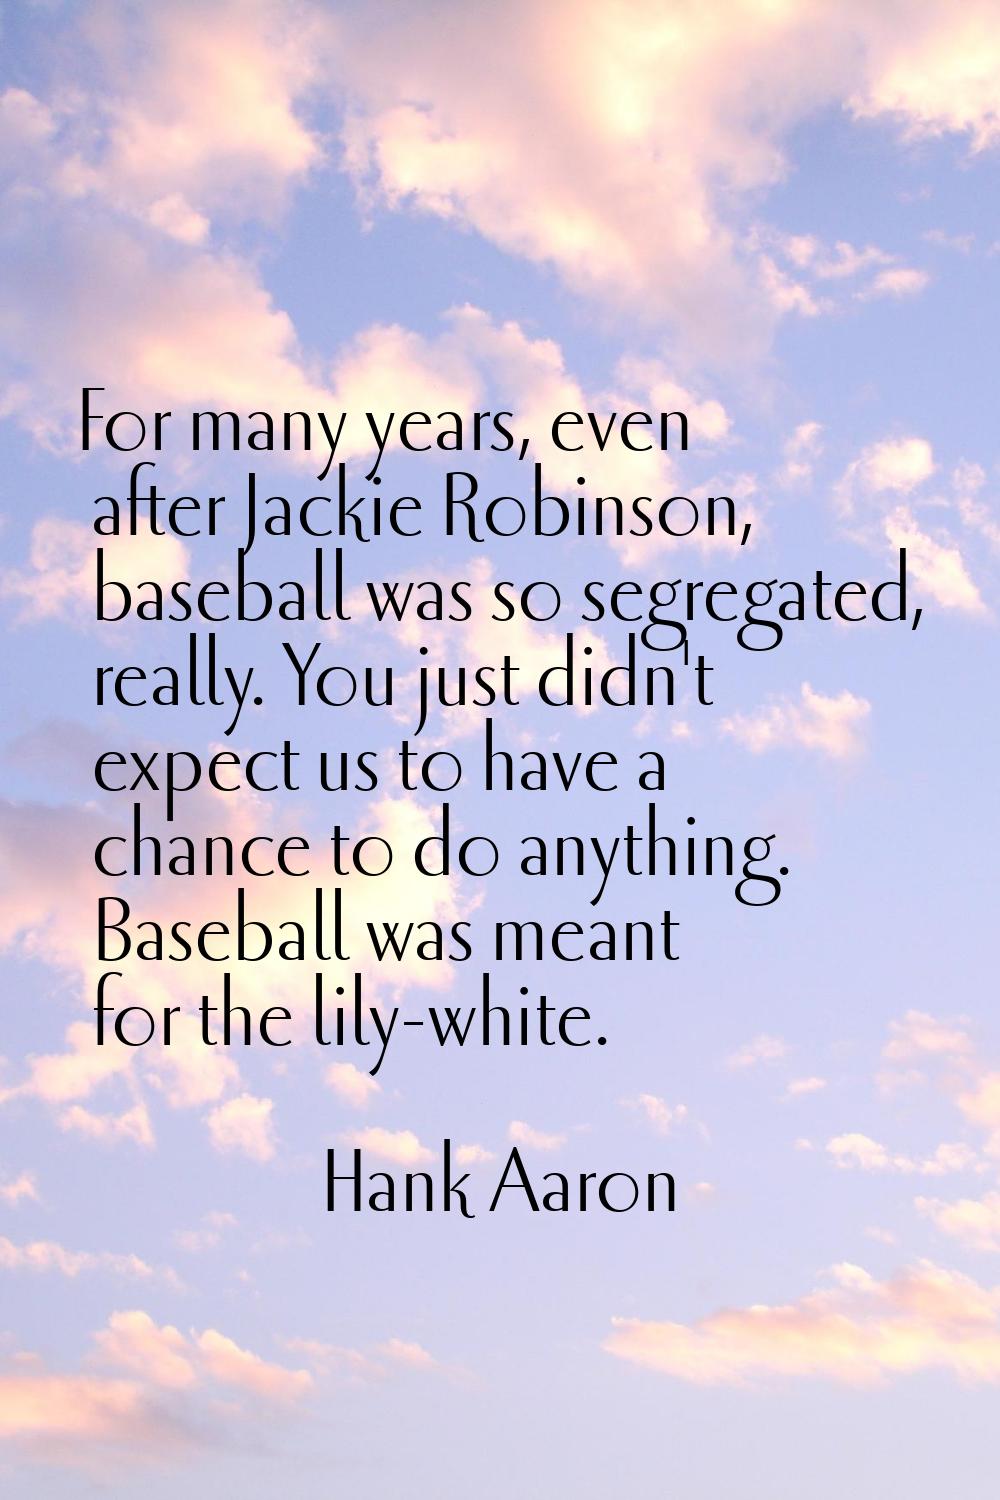 For many years, even after Jackie Robinson, baseball was so segregated, really. You just didn't exp